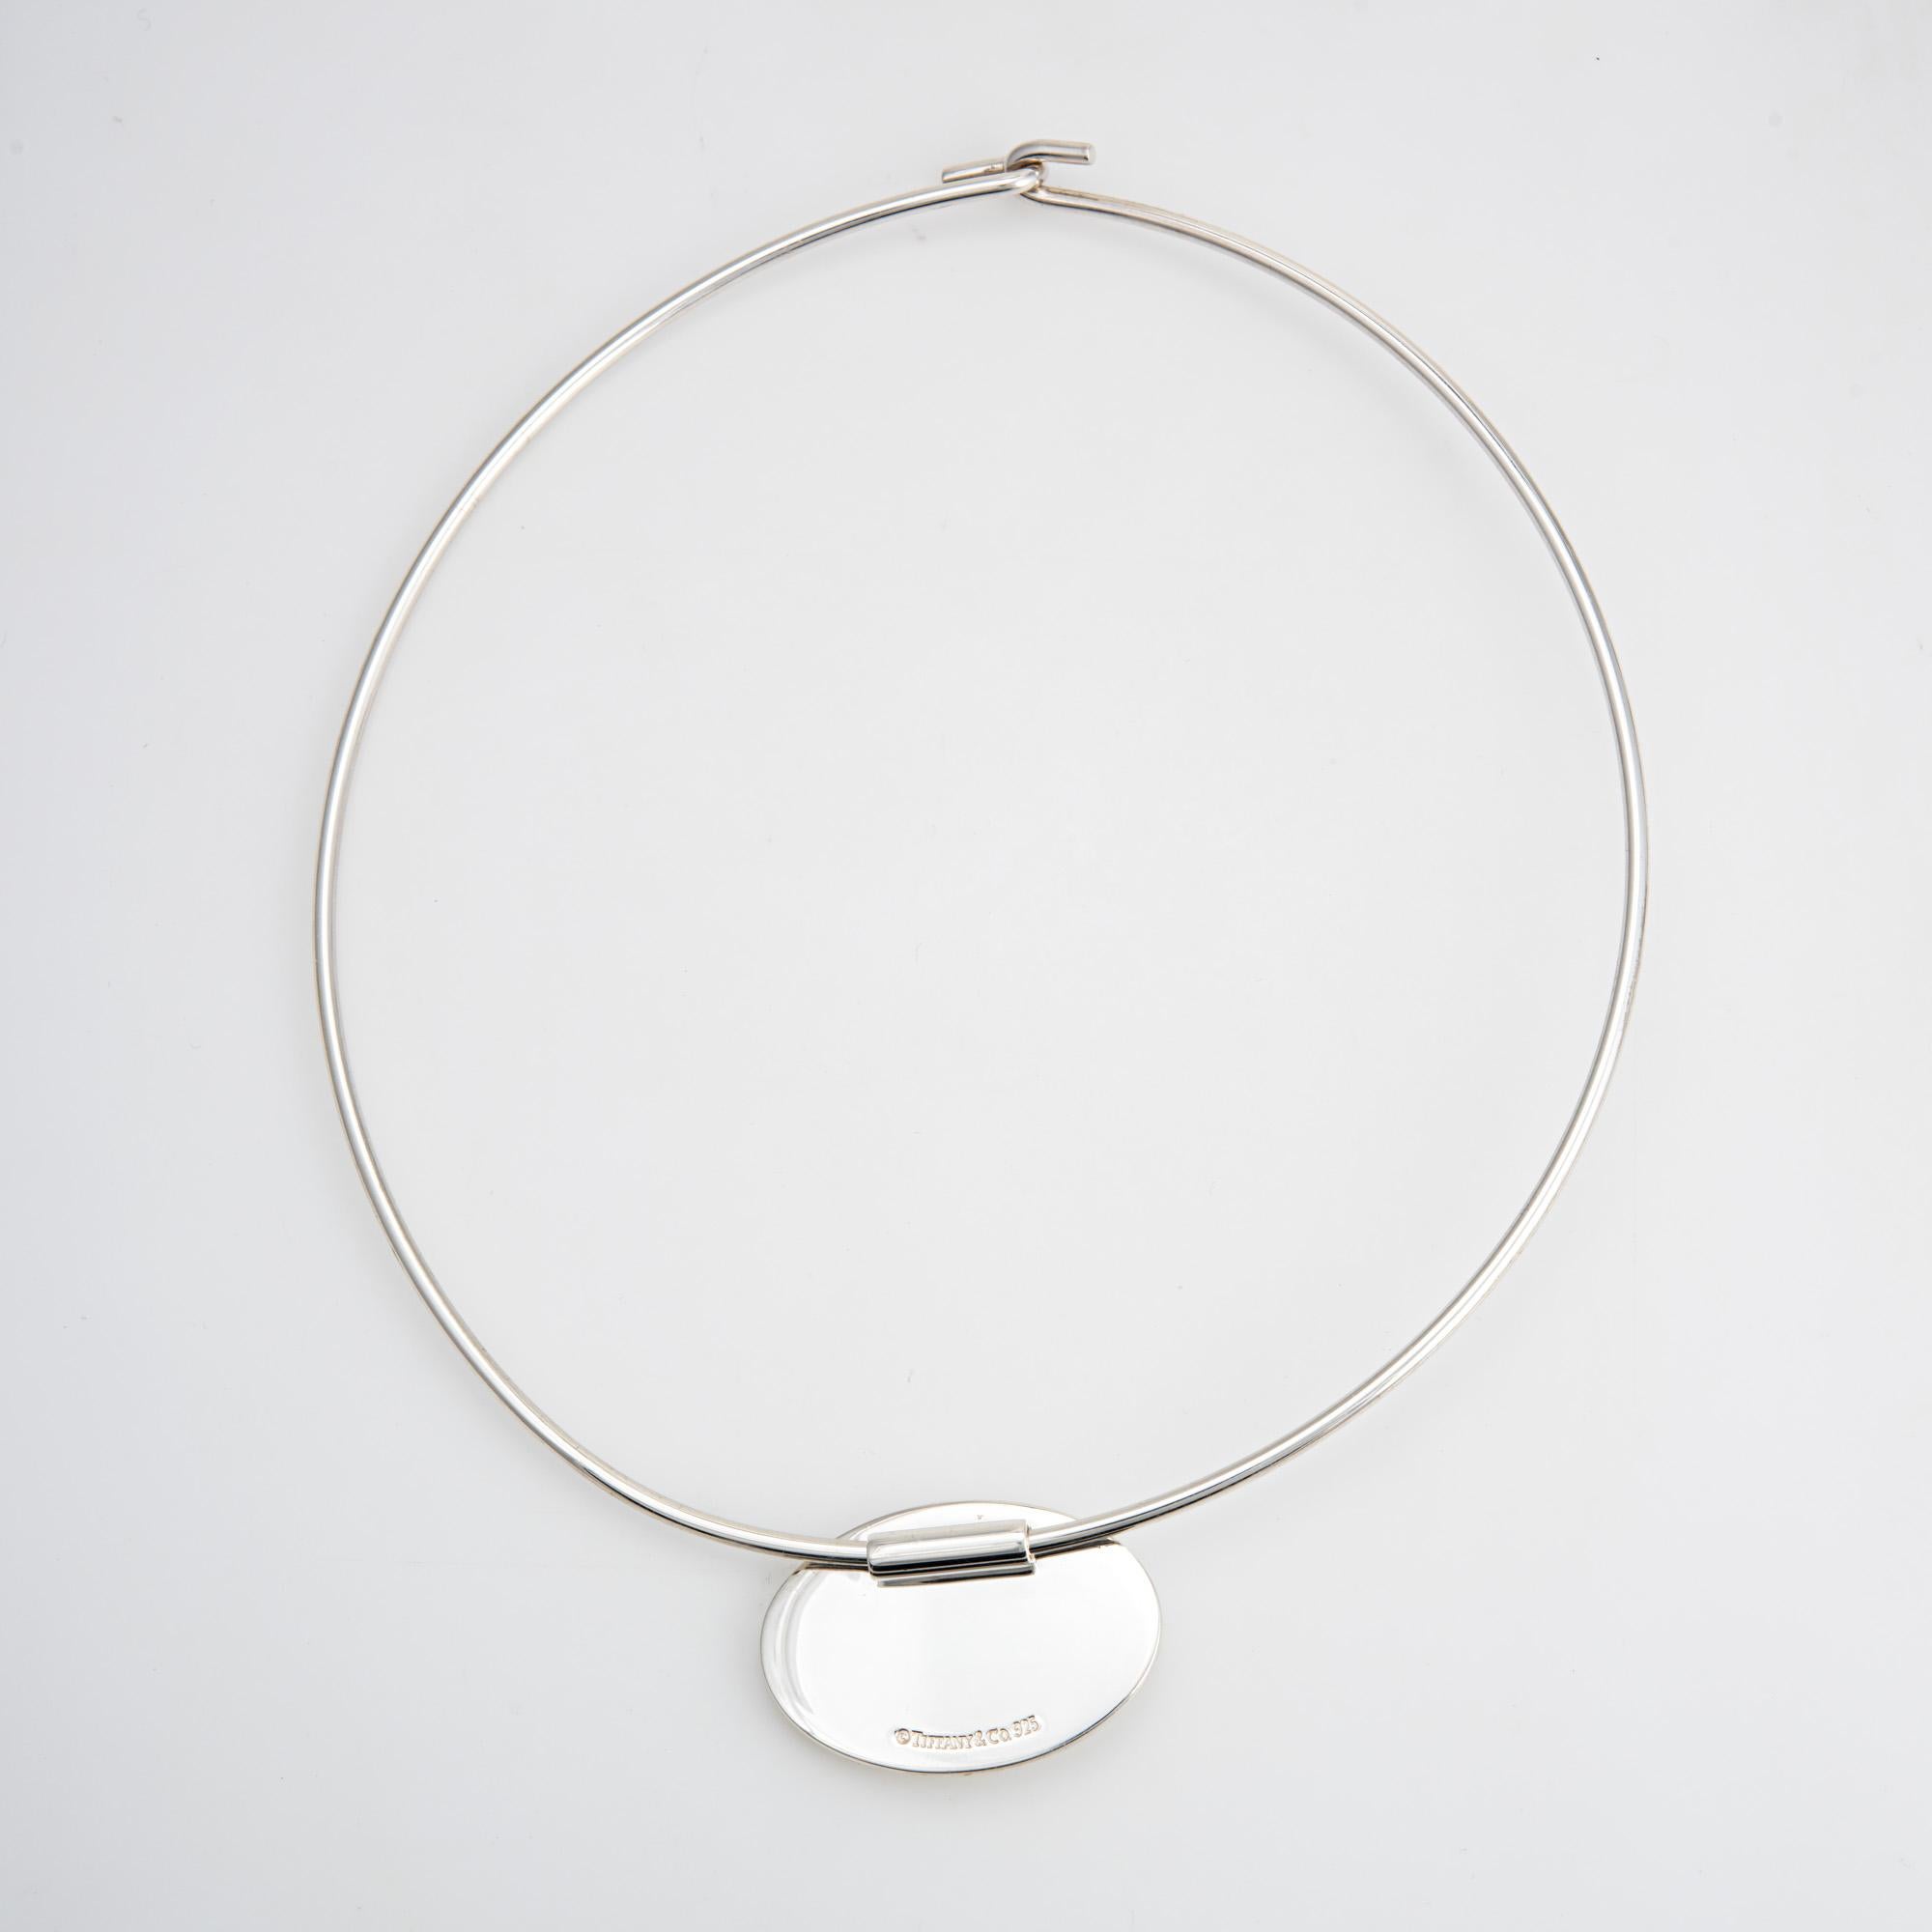 Stylish and elegant vintage Tiffany & Co collar necklace crafted in sterling silver.  

The collar necklace is fitted with an oval disc pendant (movable on the collar). Measuring 15.5 inches in length the necklace is designed to sit as a choker on